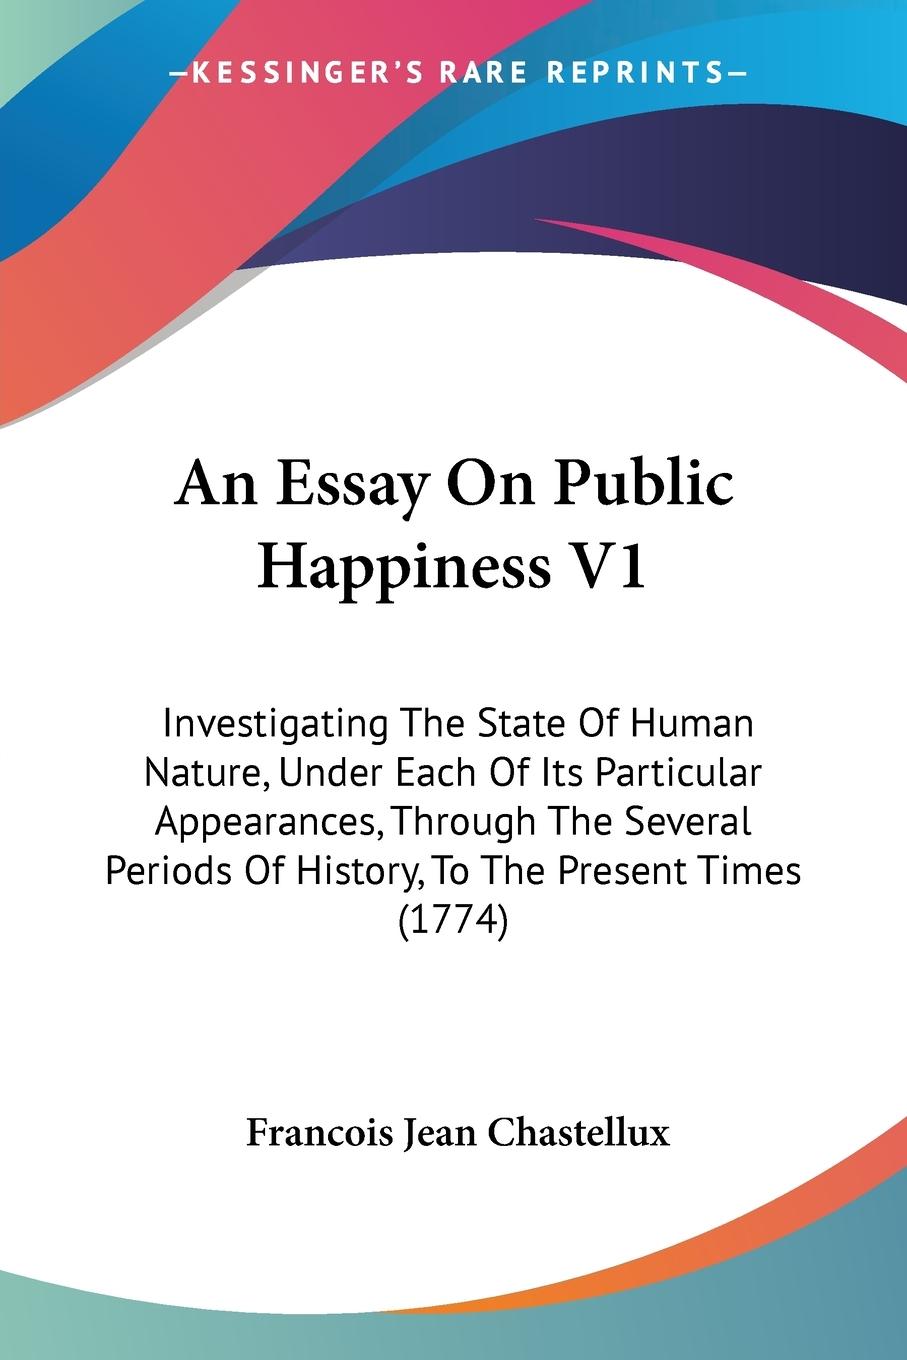 An Essay On Public Happiness V1 - Chastellux, Francois Jean